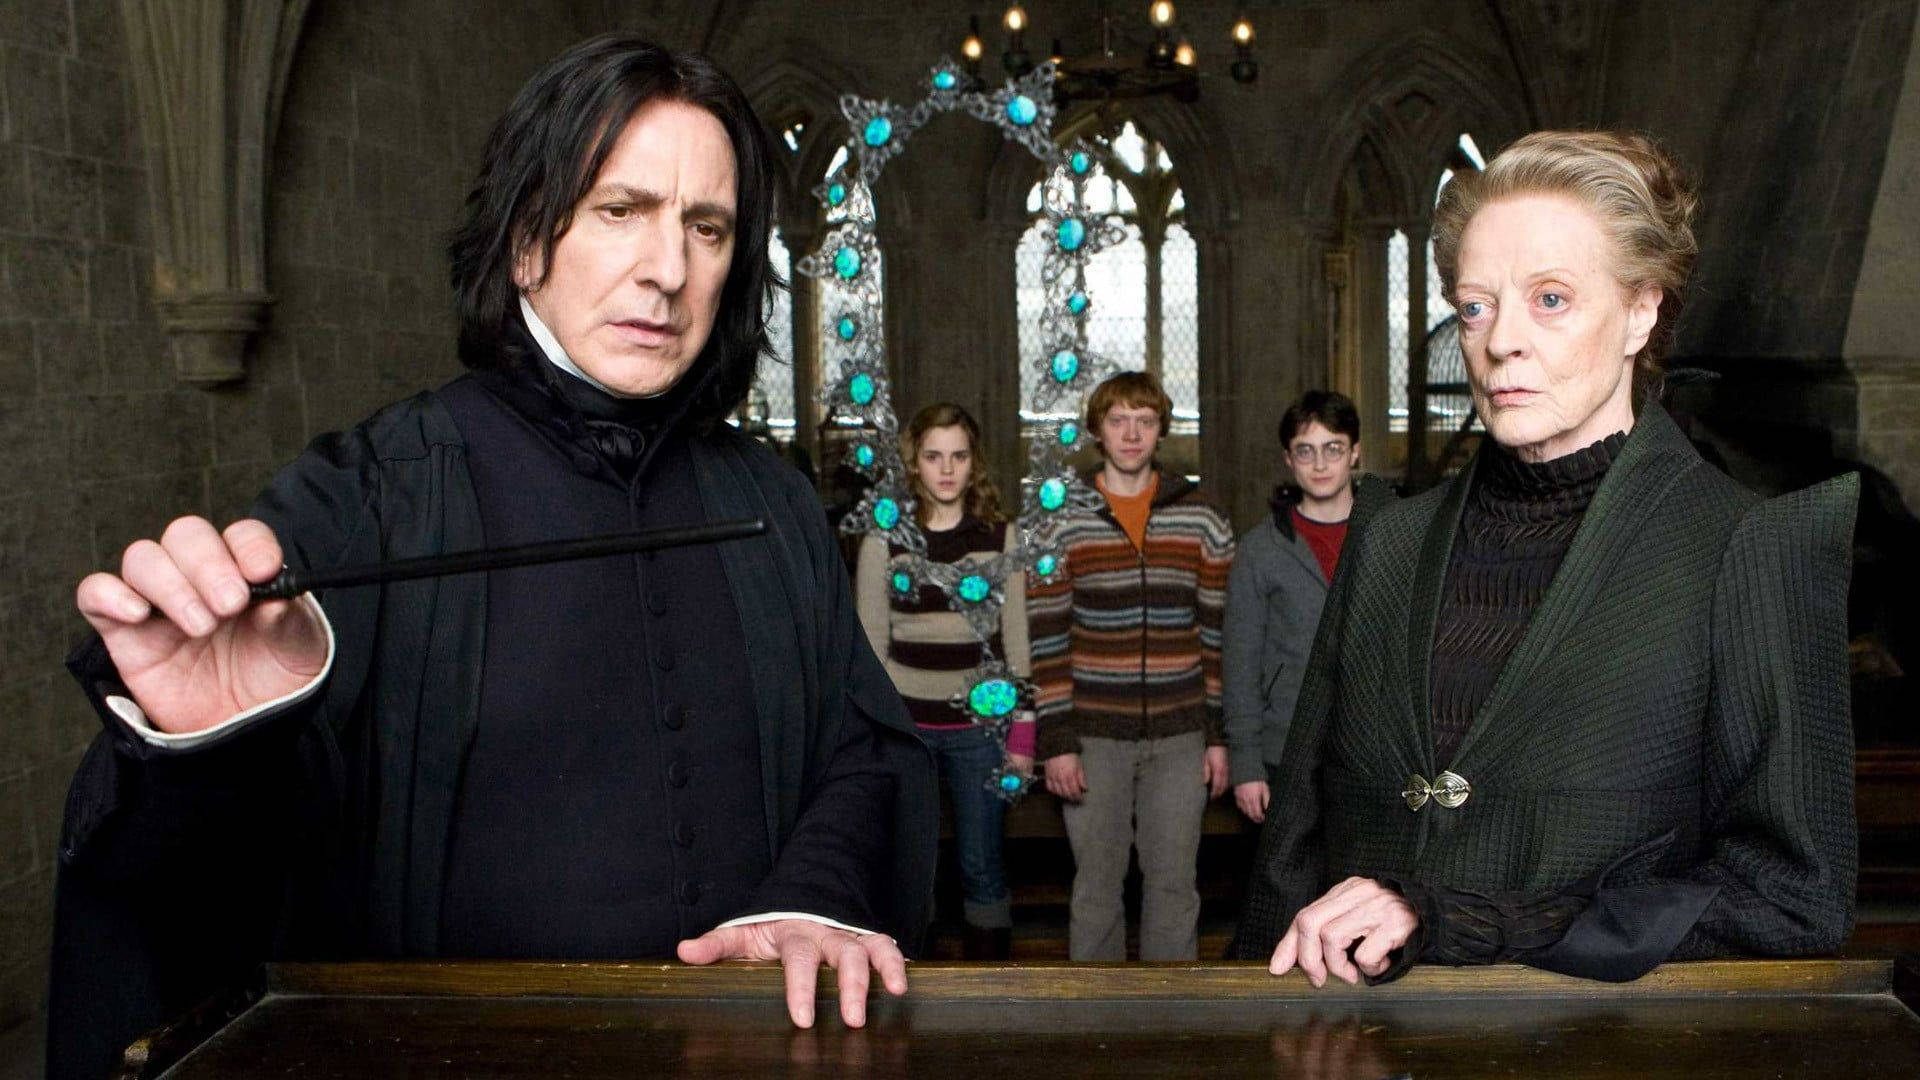 Ron Weasley, Professor Mcgonagall And Professor Snape Stand Together At Hogwarts.